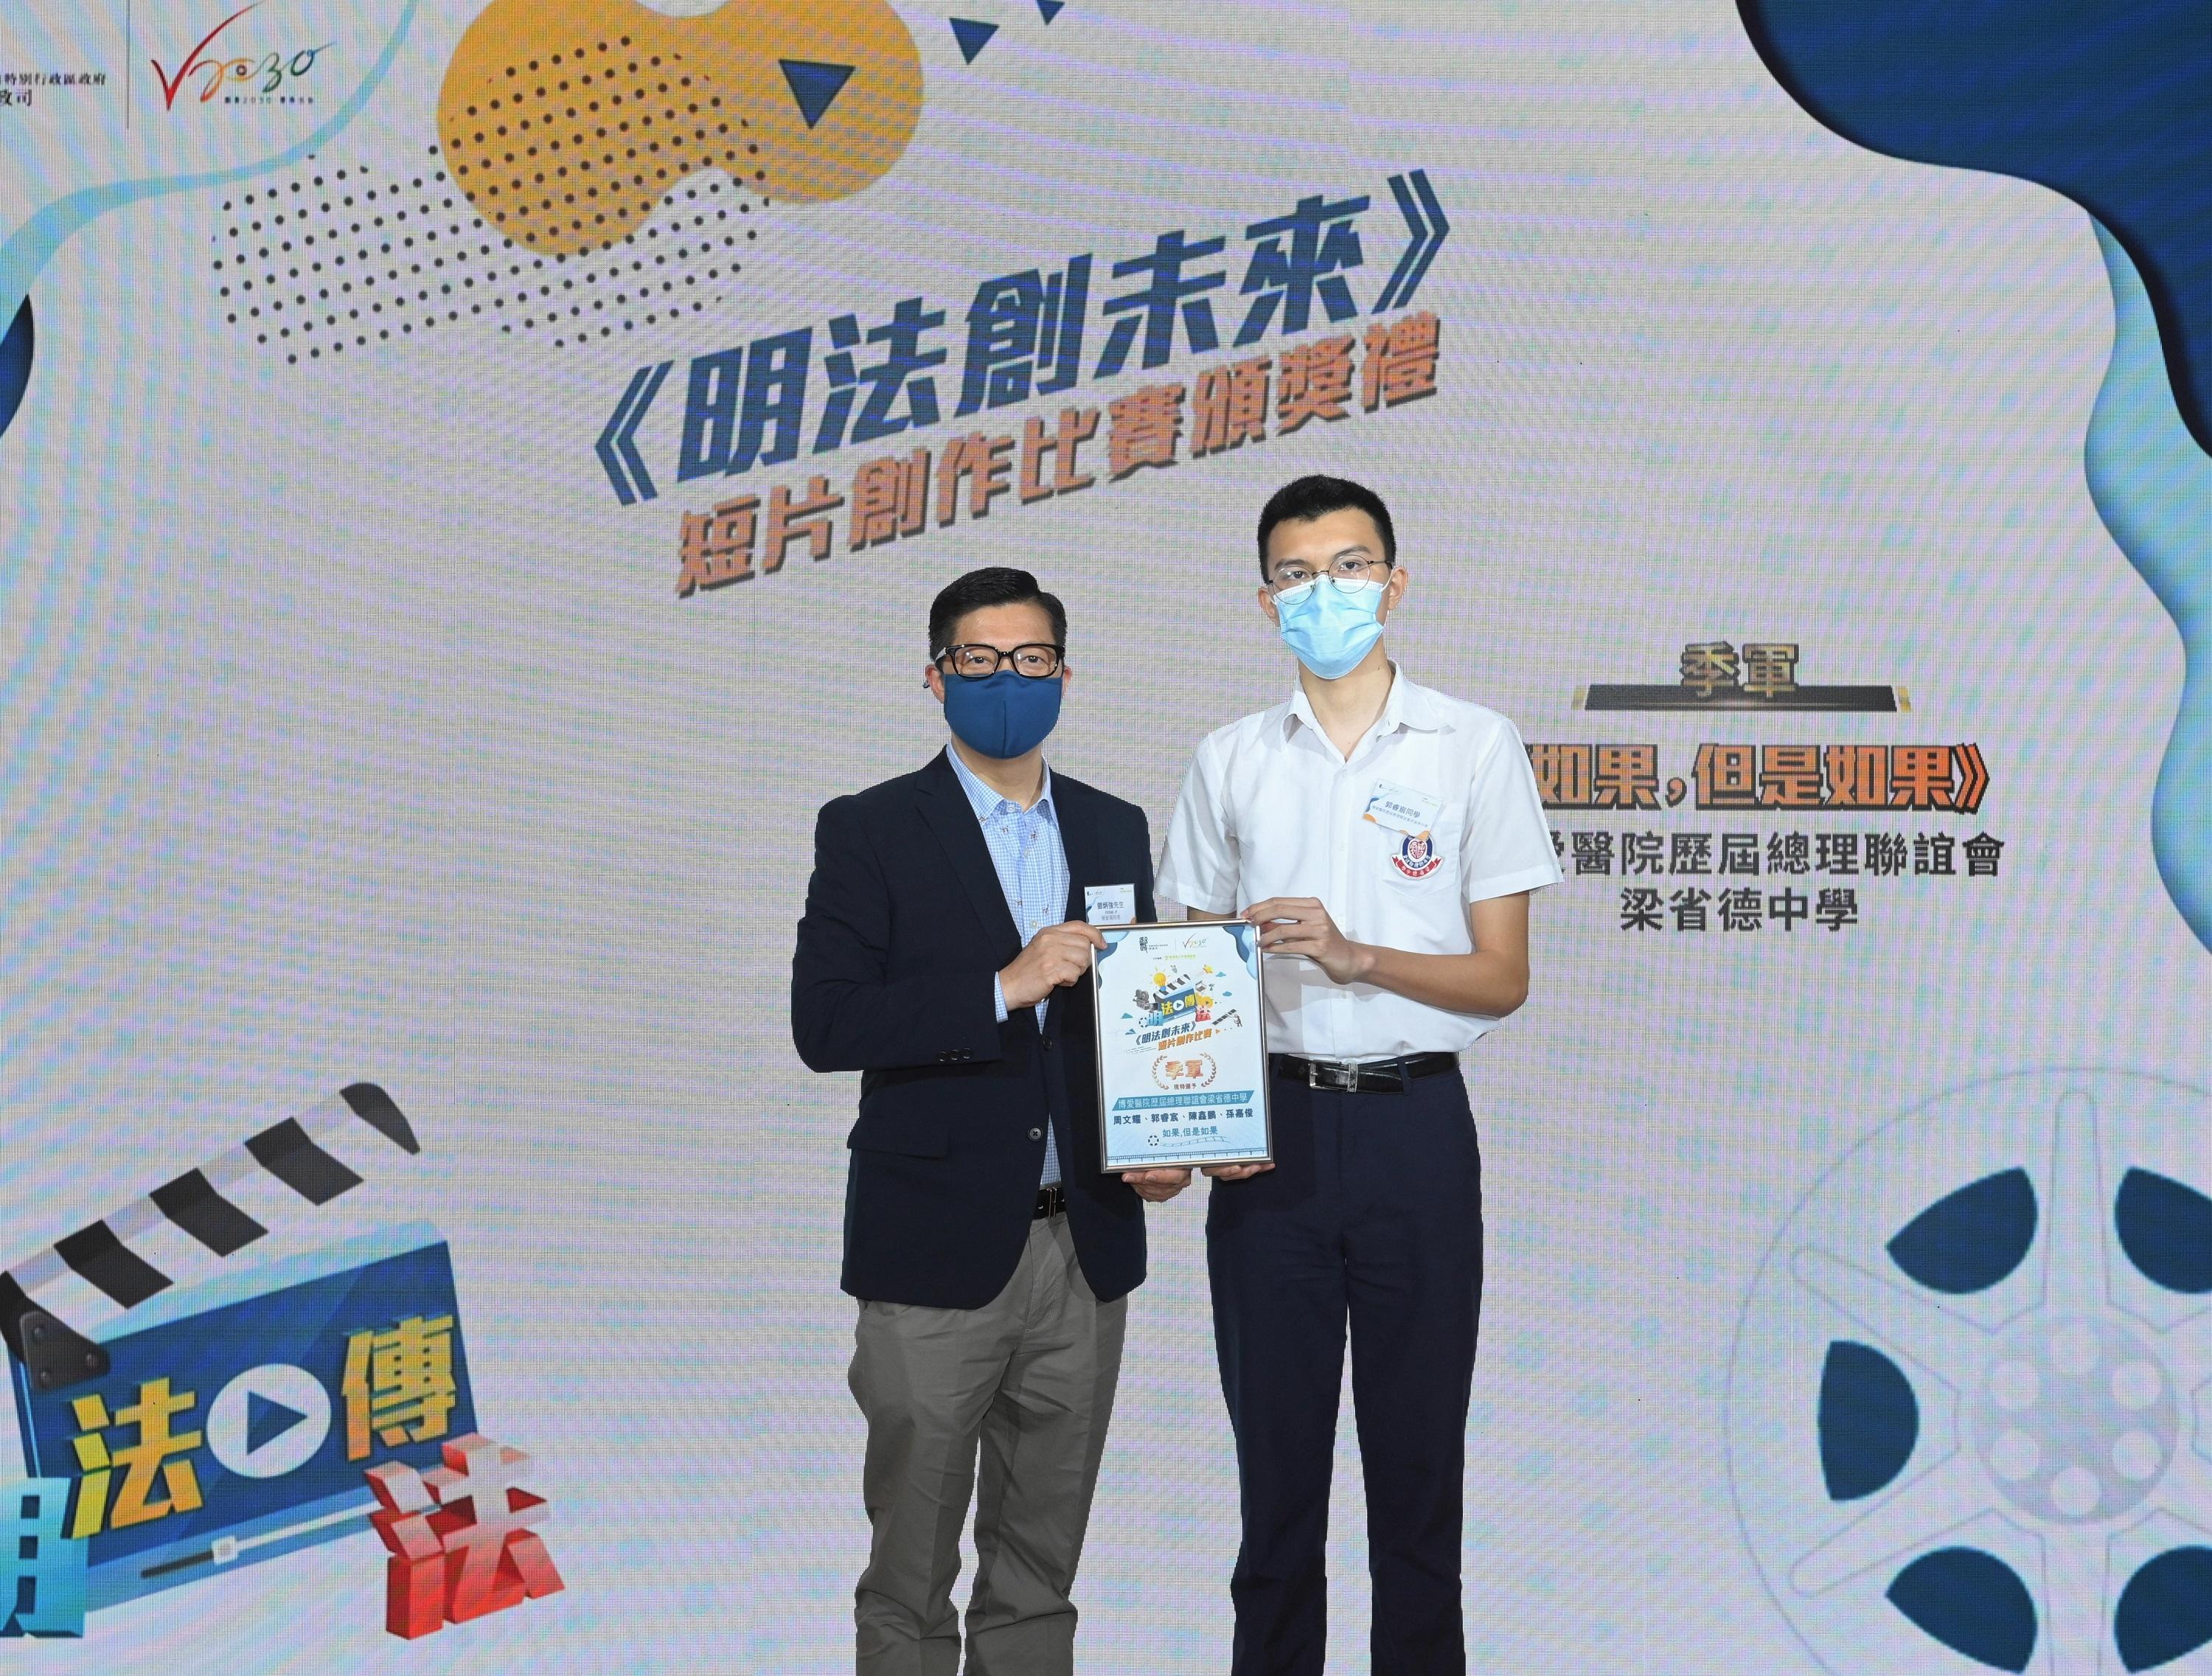 The "Key to the Future" Short Video Competition Award Presentation Ceremony organised by the Department of Justice was held today (May 7). Picture shows the Secretary for Security, Mr Tang Ping-keung, presenting award to the second runner-up.